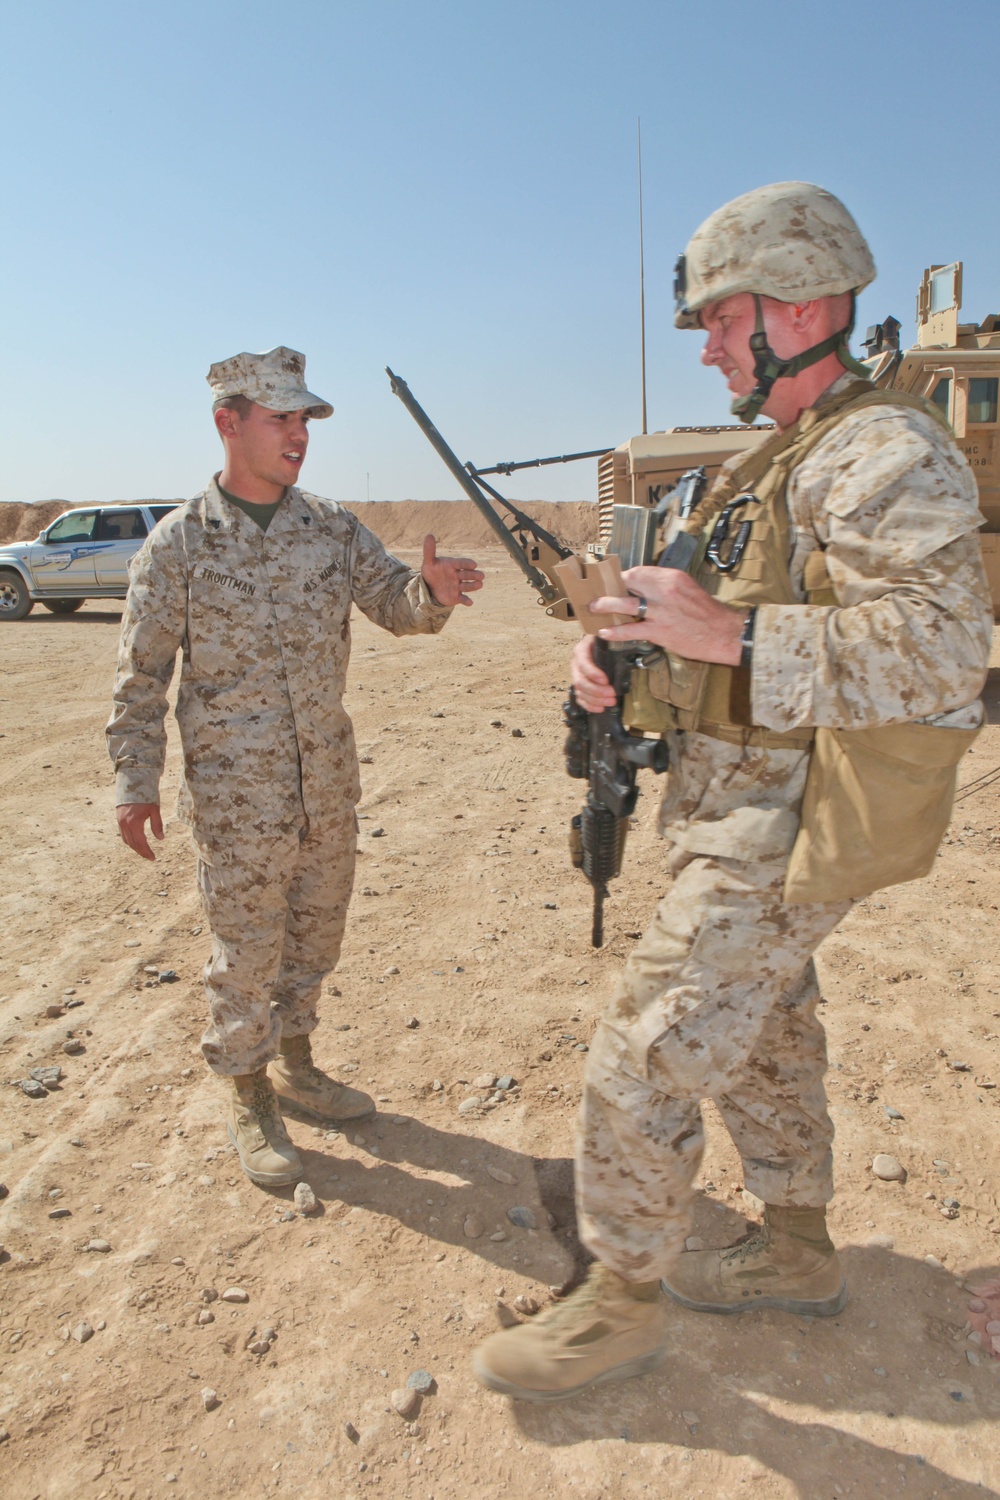 Michigan native makes name for himself in Marine Corps, Afghanistan